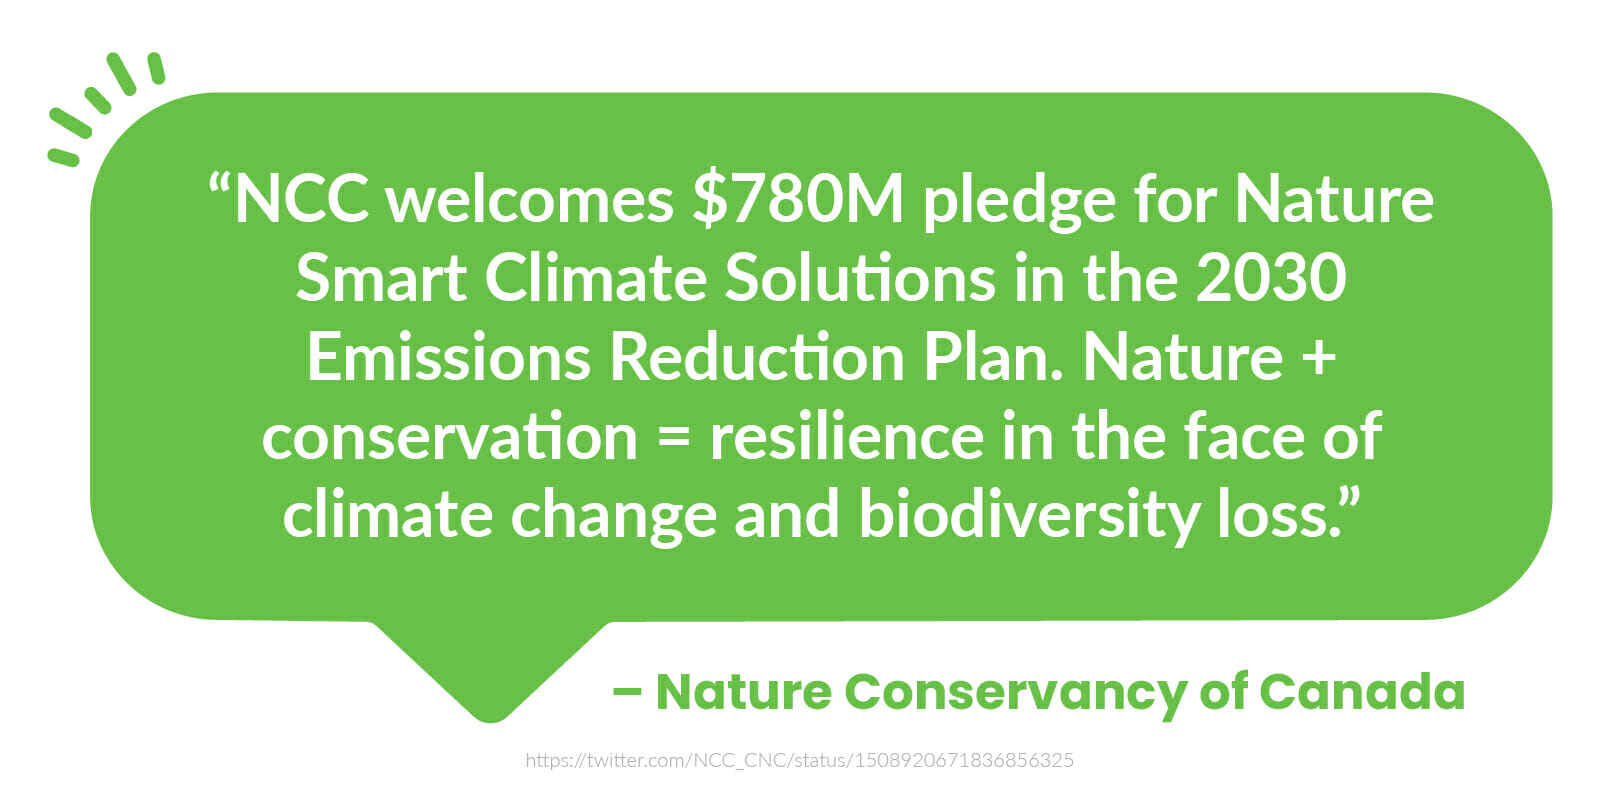  “NCC welcomes $780M pledge for Nature Smart Climate Solutions in the 2030 Emissions Reduction Plan. Nature + conservation = resilience in the face of climate change and biodiversity loss.” - Nature Conservancy Canada